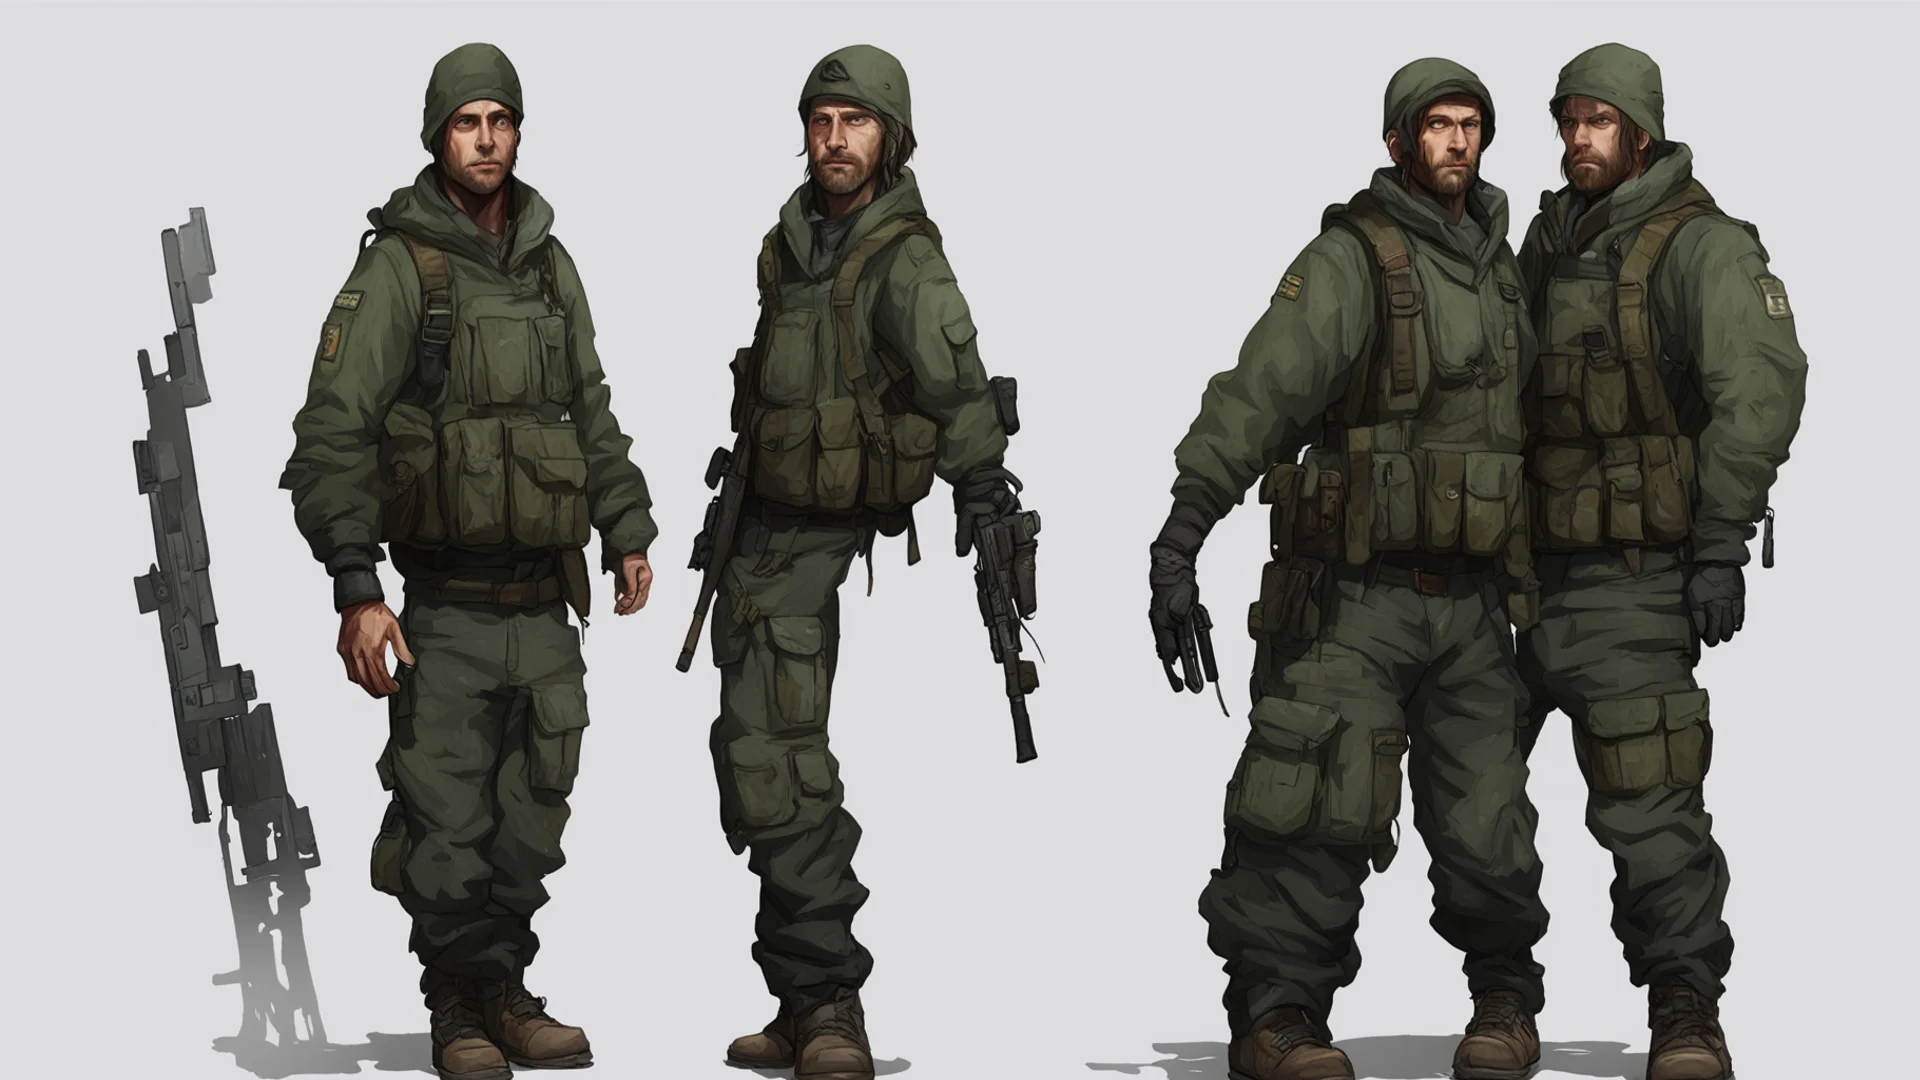 aia game character concept art inspired by survival games like dayz  amazing awesome portrait 2 wide